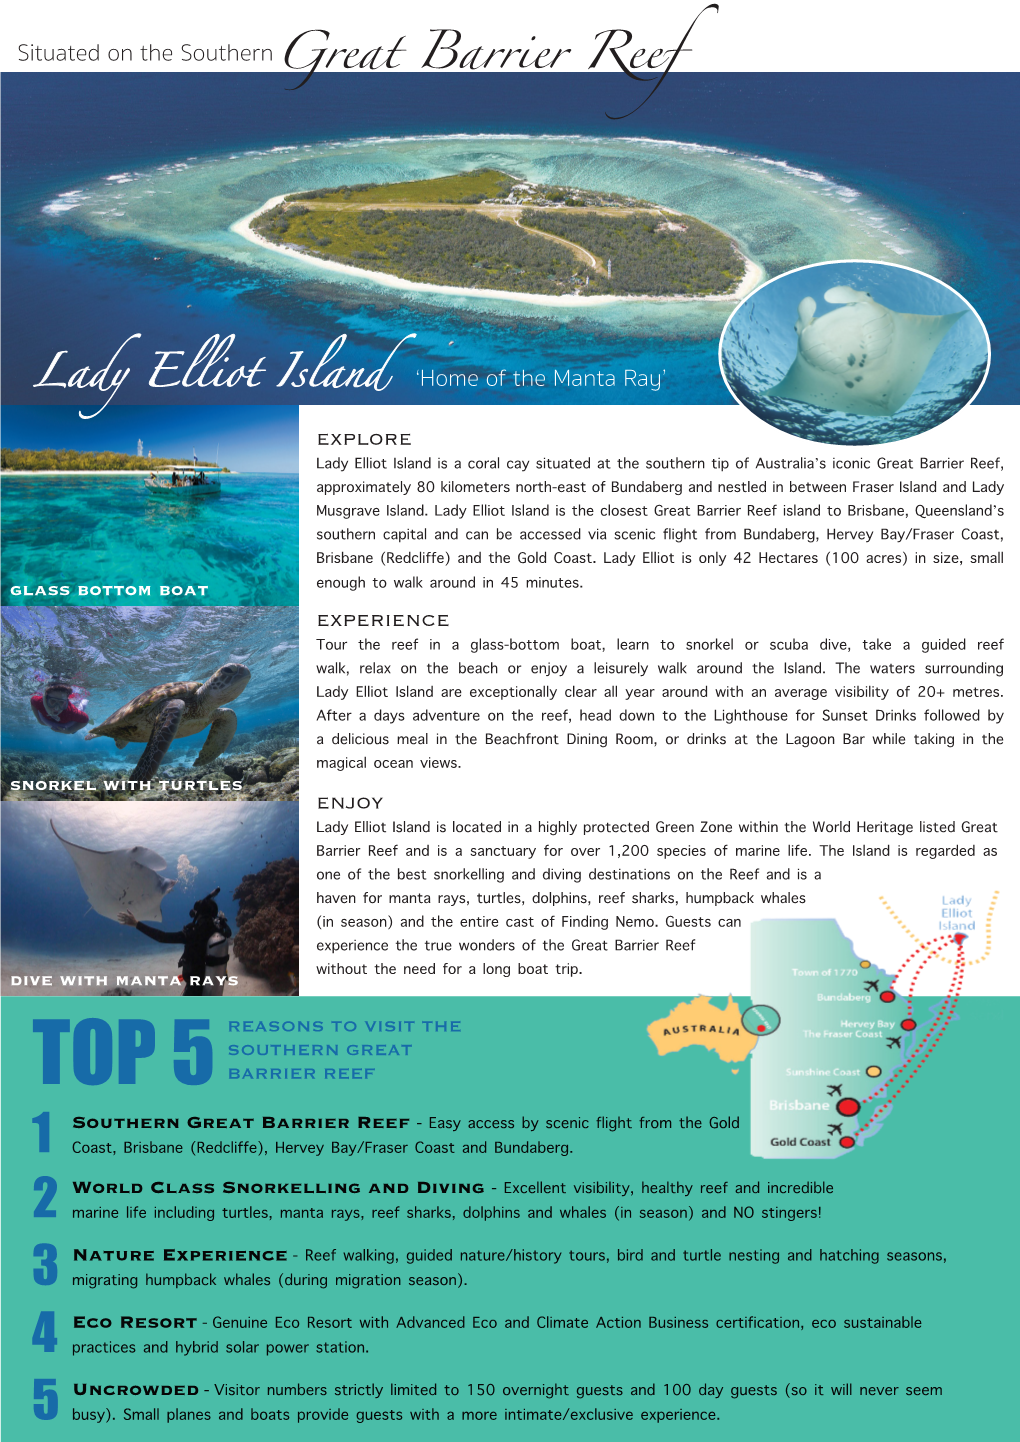 Situated on the Southern Great Barrier Reef Lady Elliot Island